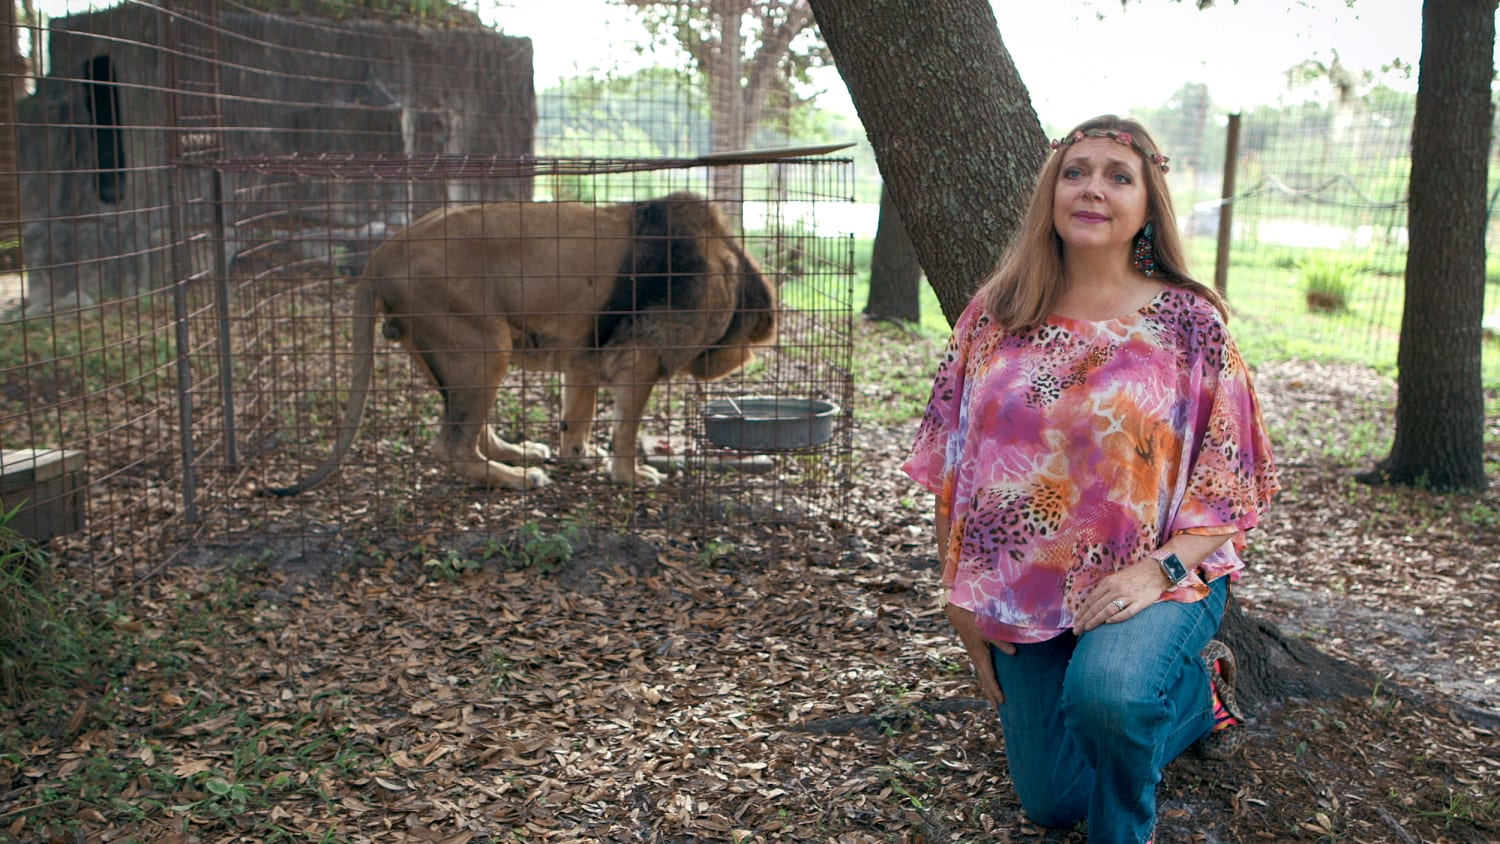 Carole Baskin trying to stop the release of ‘Tiger King 2’